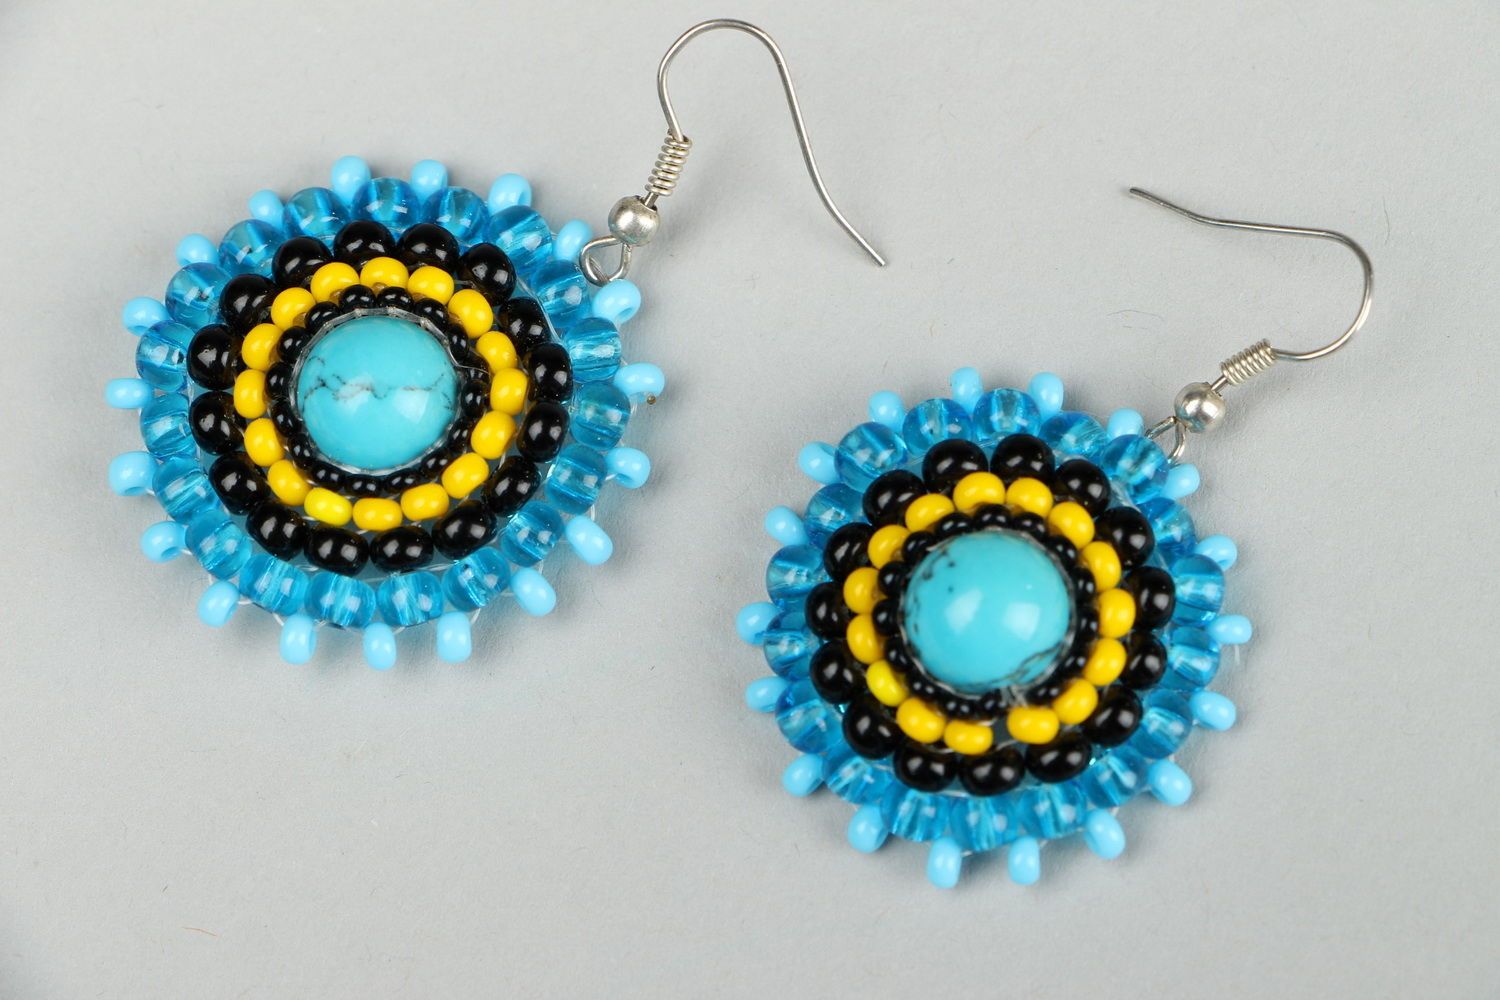 Earrings made of beads and turquoise photo 2